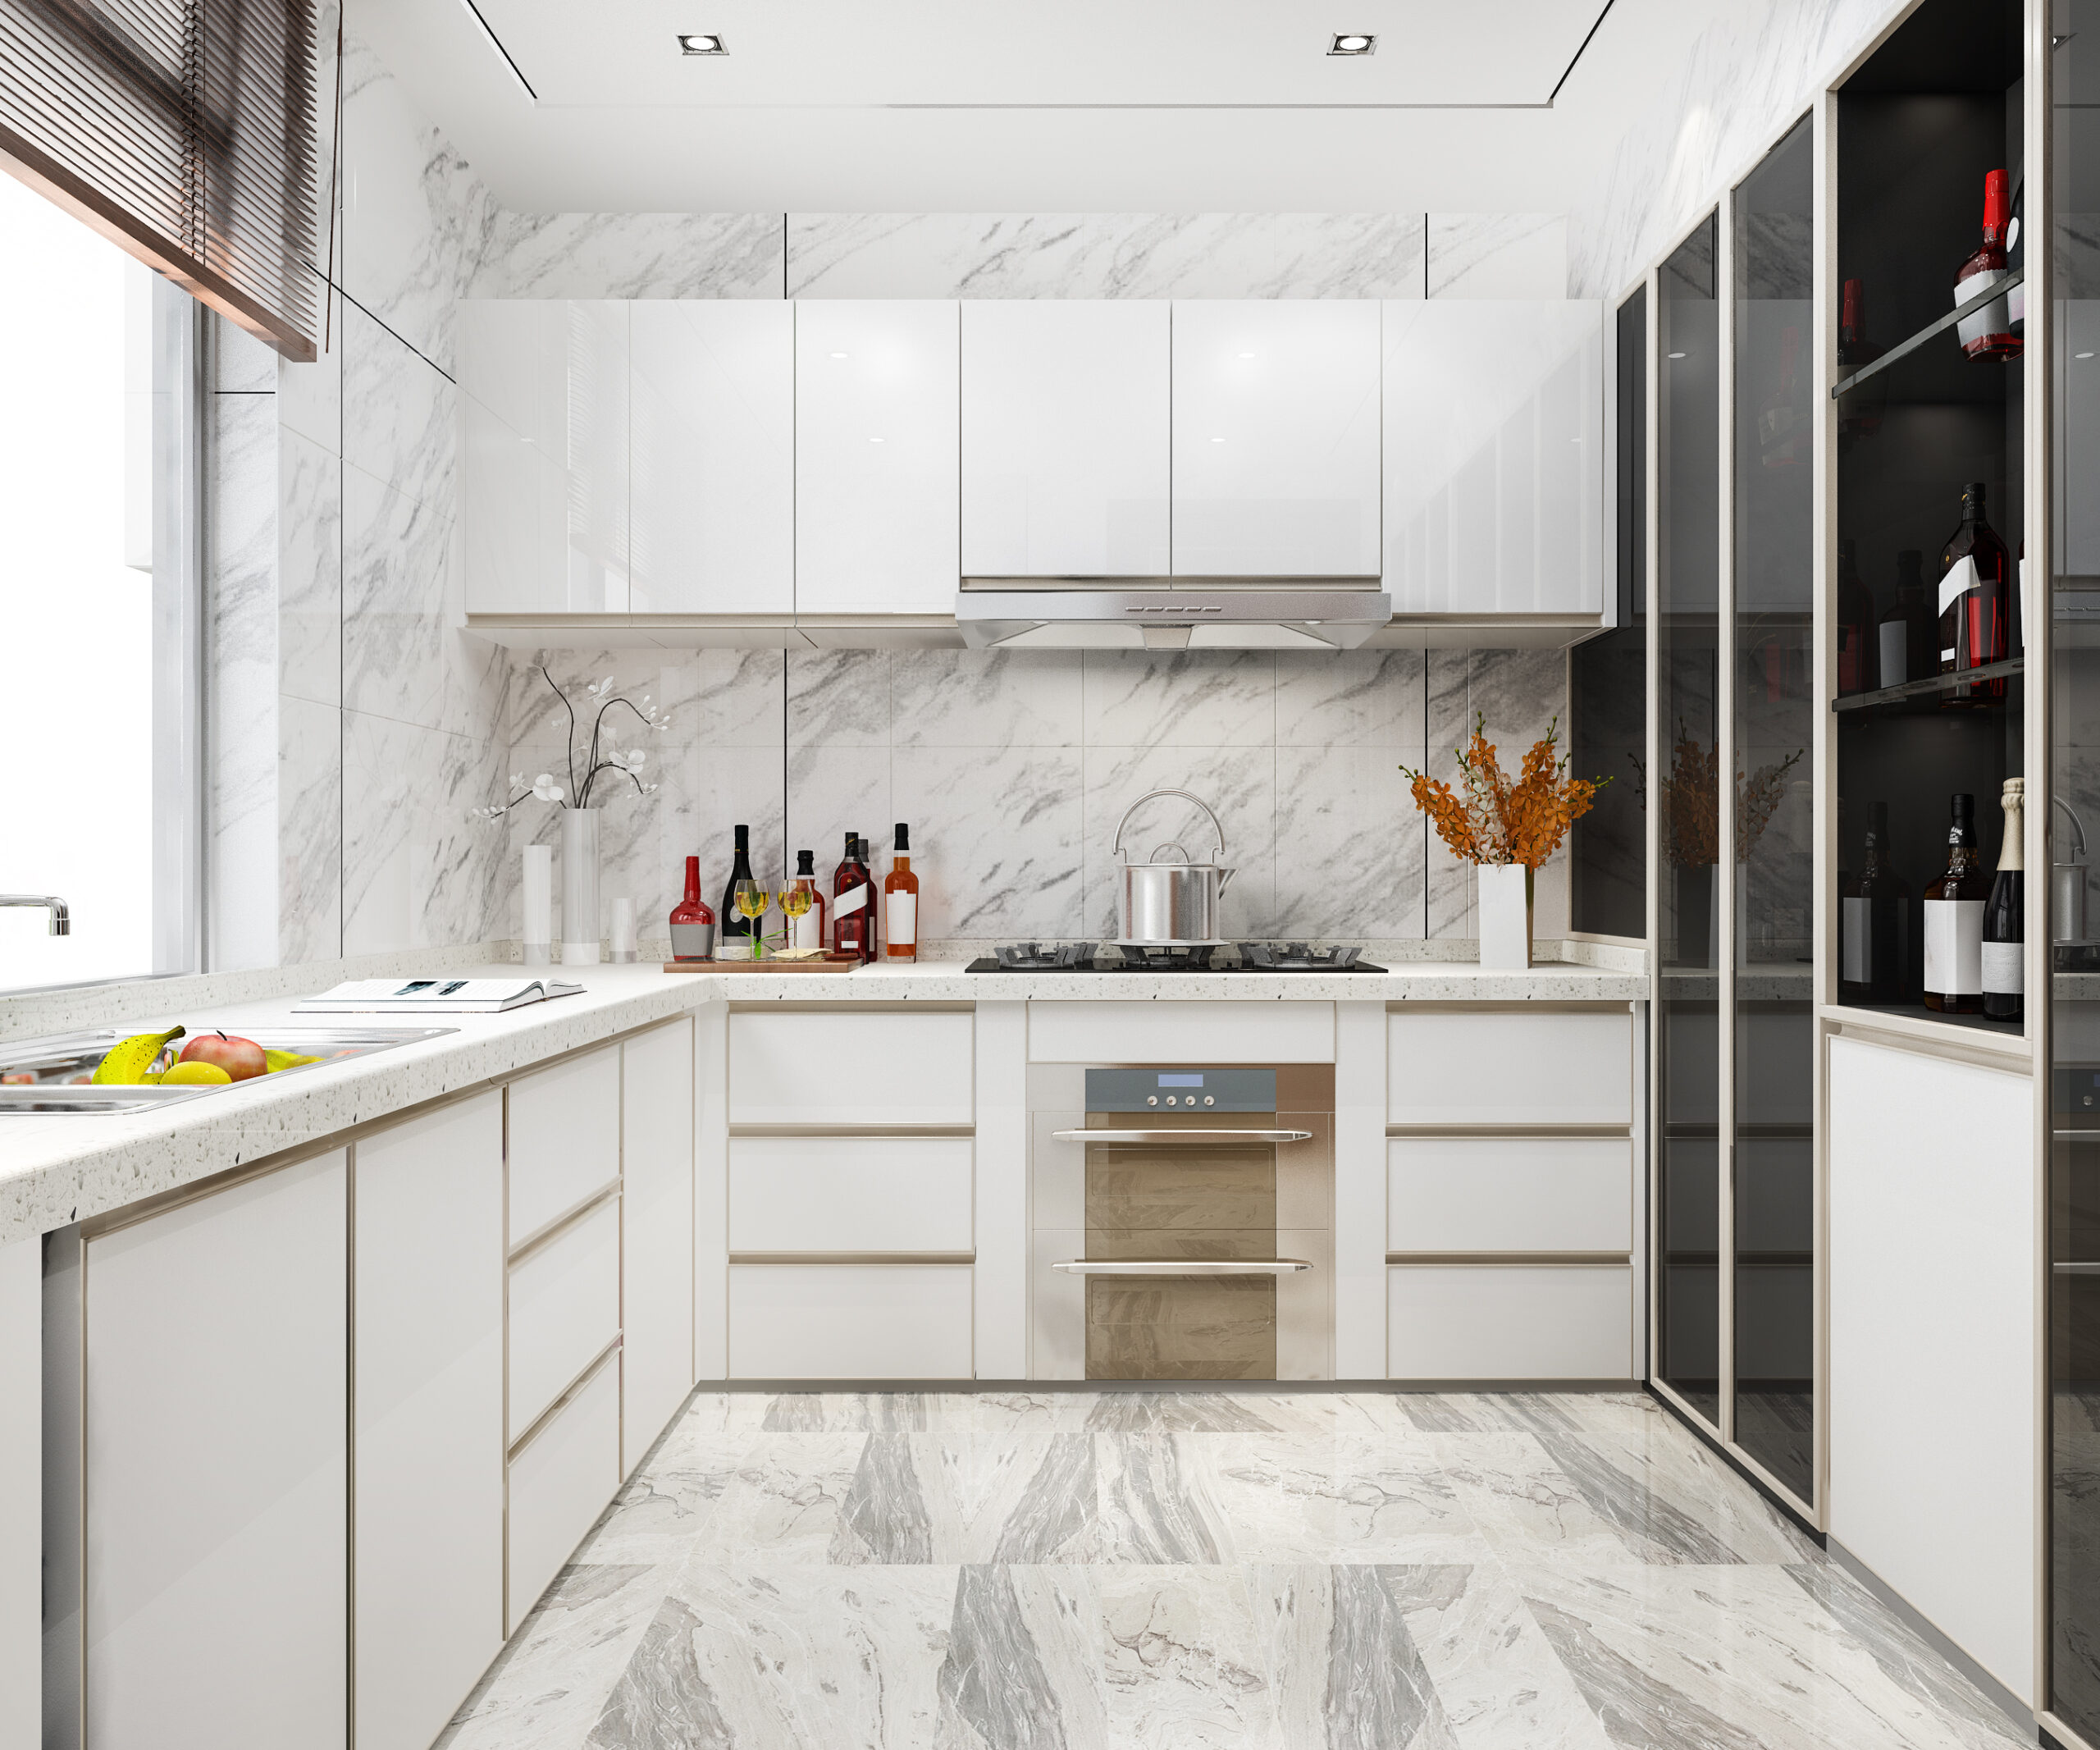 Laminate Countertop vs. Quartz: Which is Good for the Kitchen?